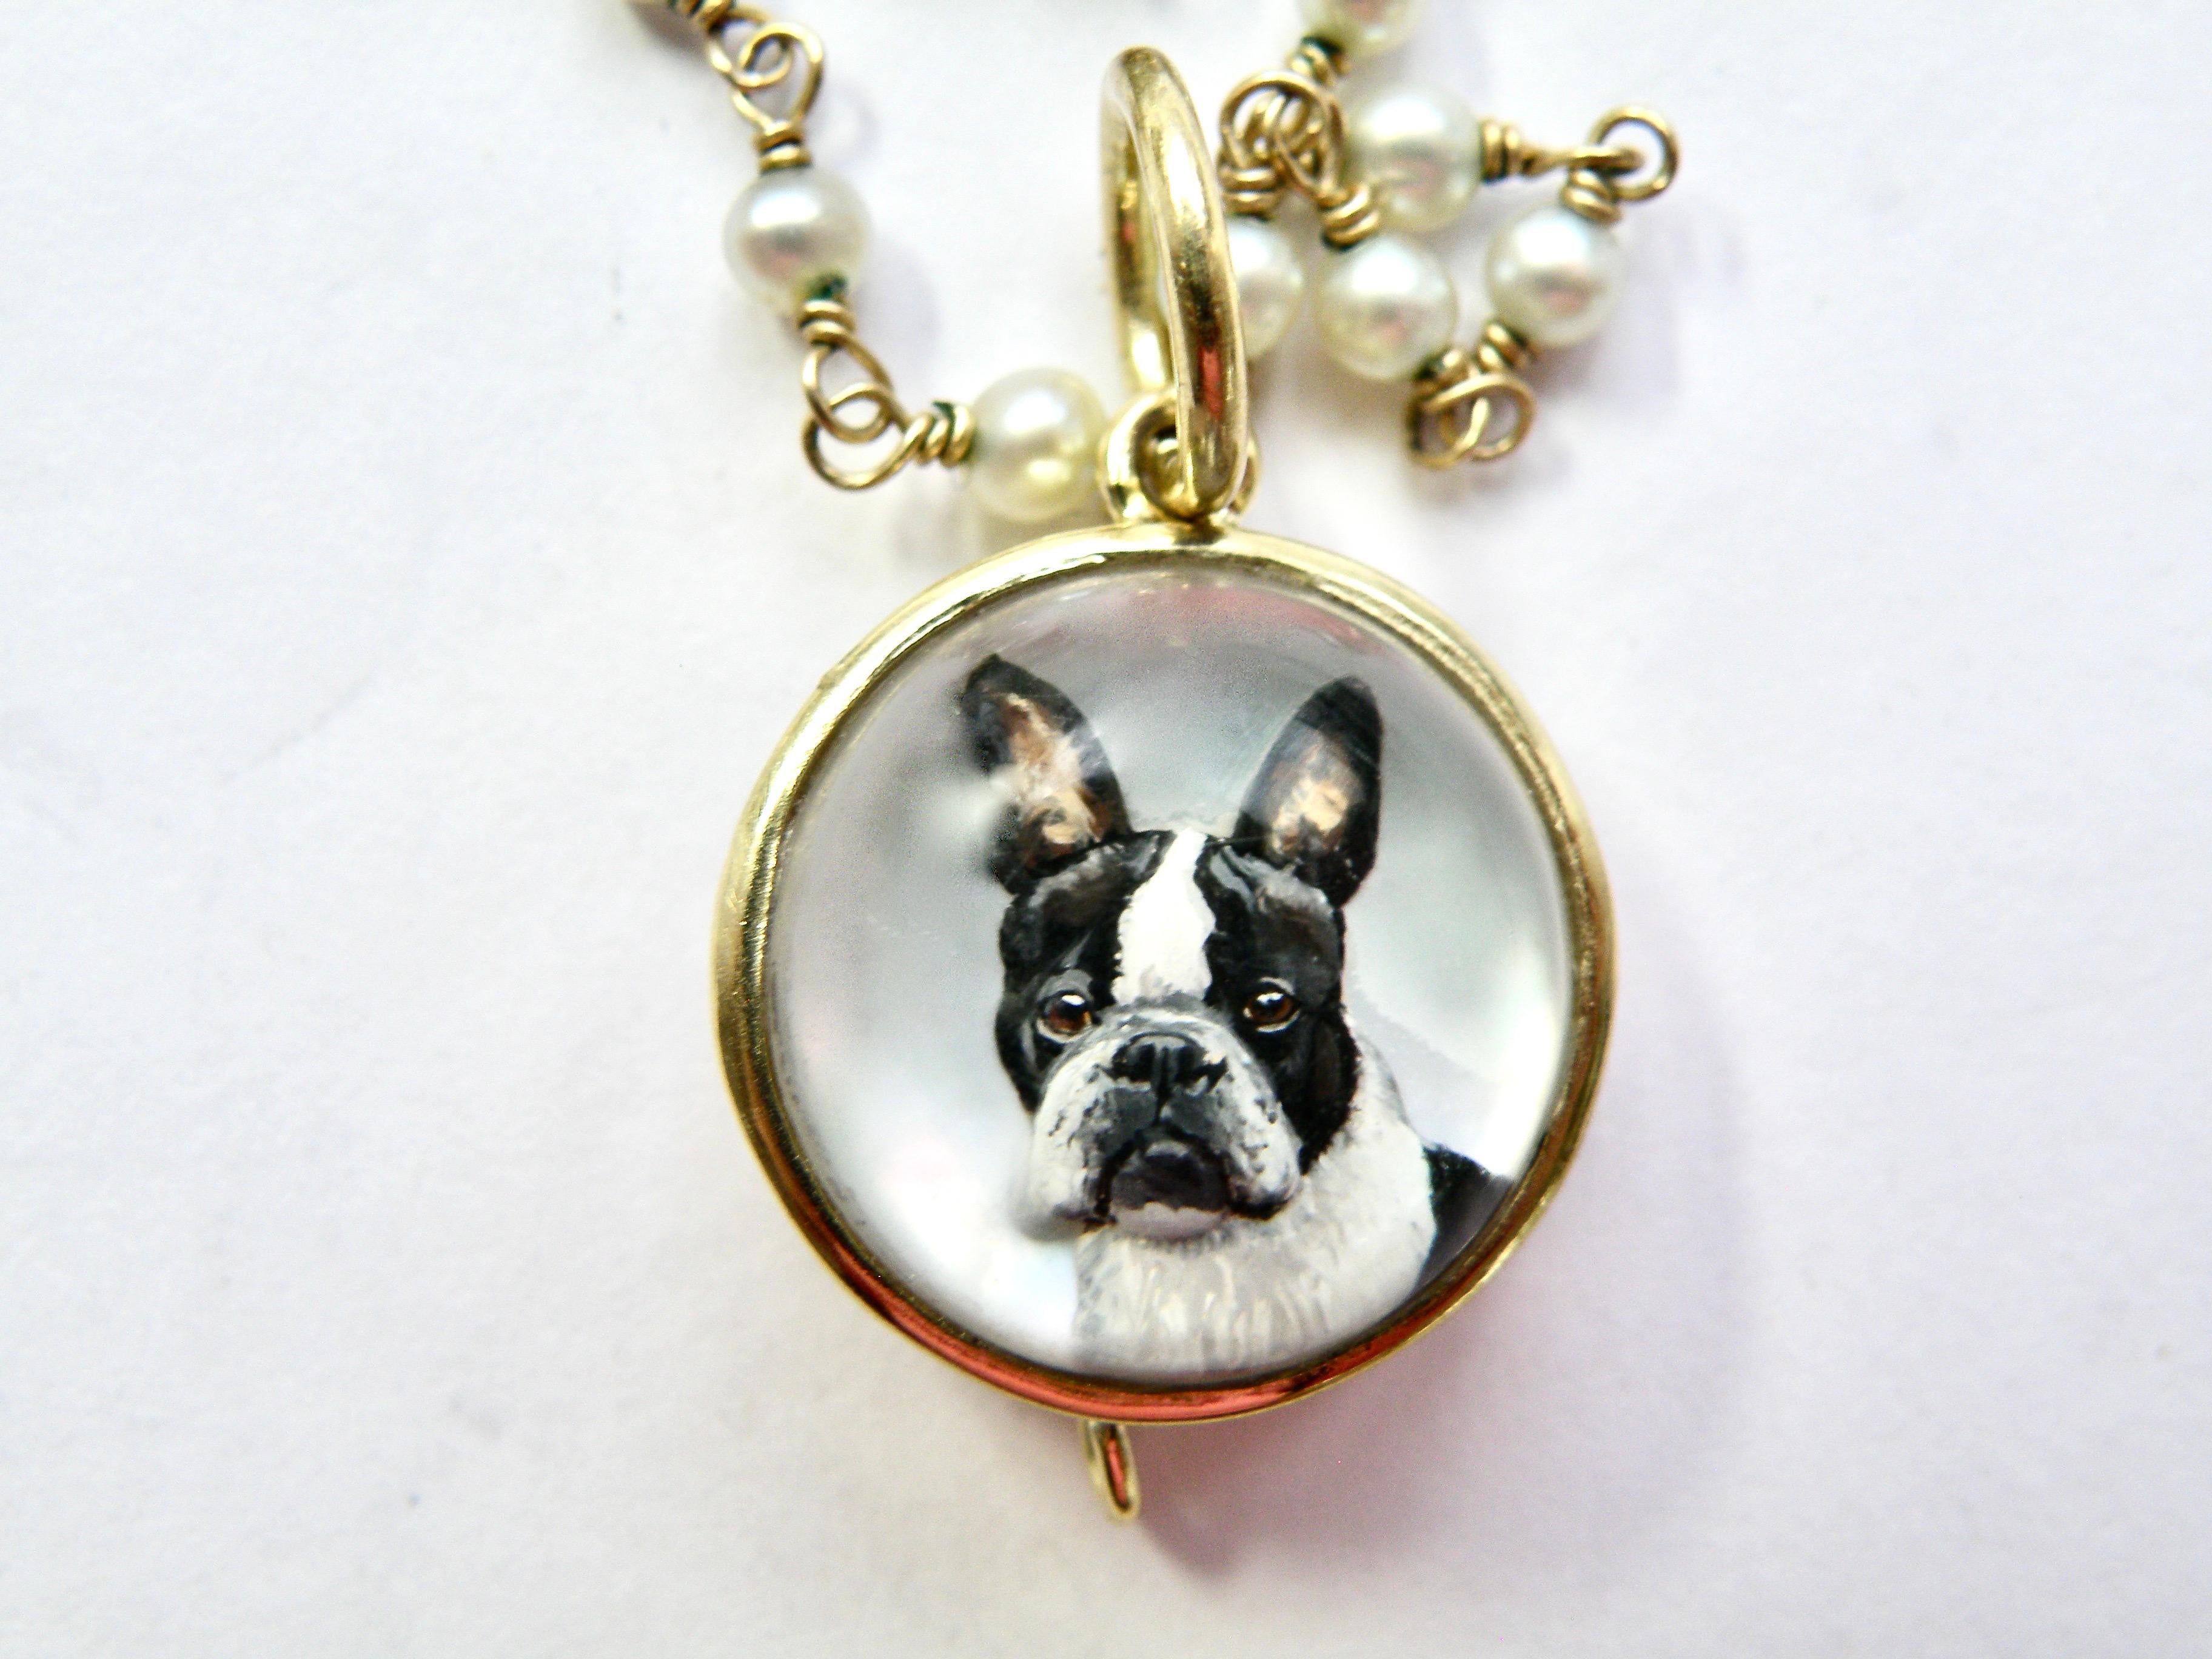 18K boston terrier pug pendant hand painted reverse crystal quartz backed with mothher of pearl hand ainted by Idhar Oberstein master carver